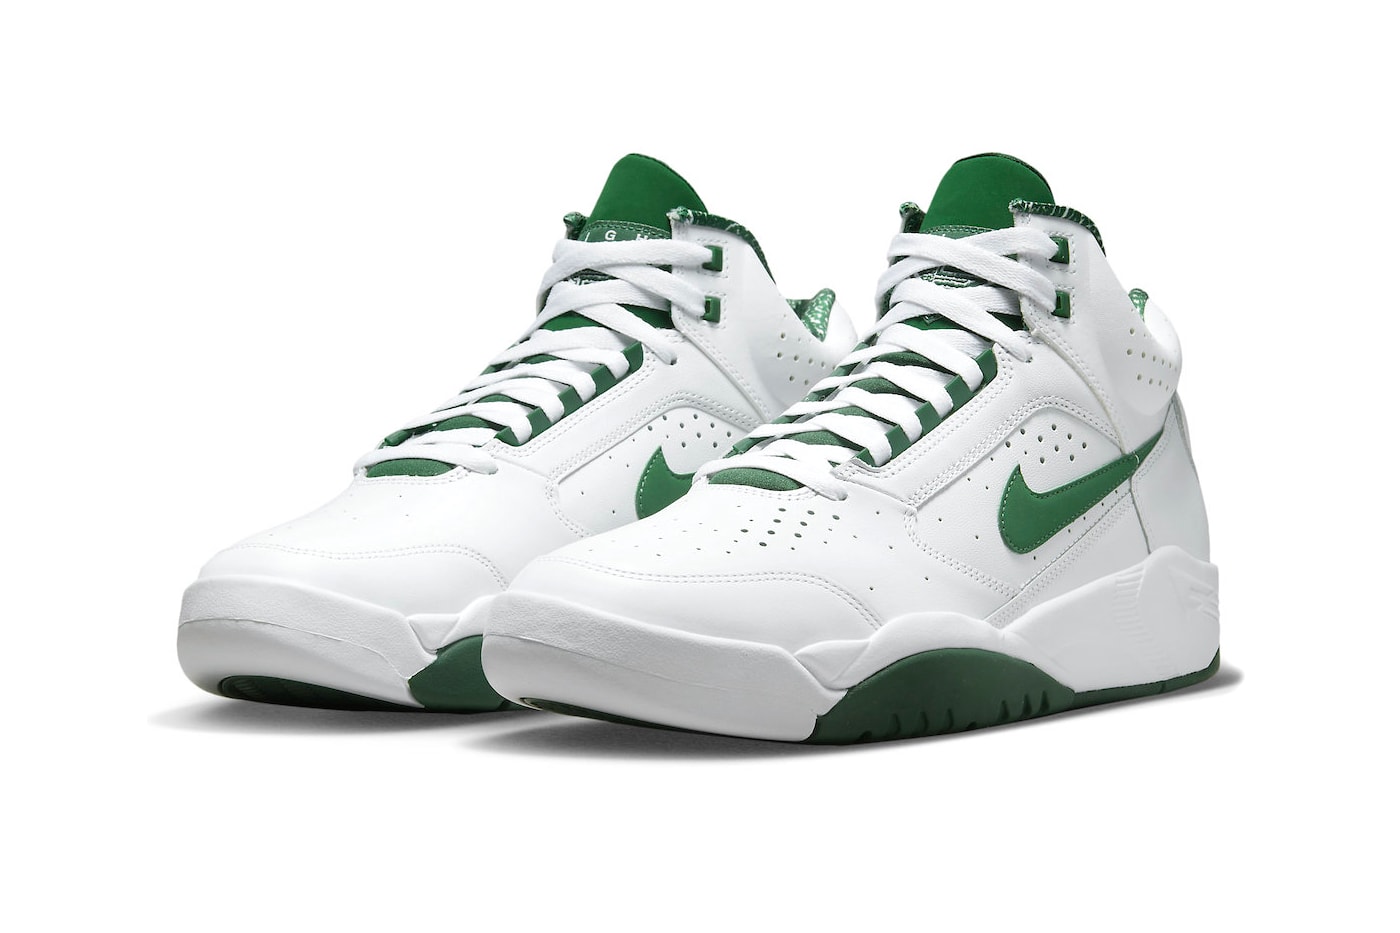 Nike Air Flight Lite Mid Gorge Green Official Look Release Info DJ2518-103 Date Buy Price